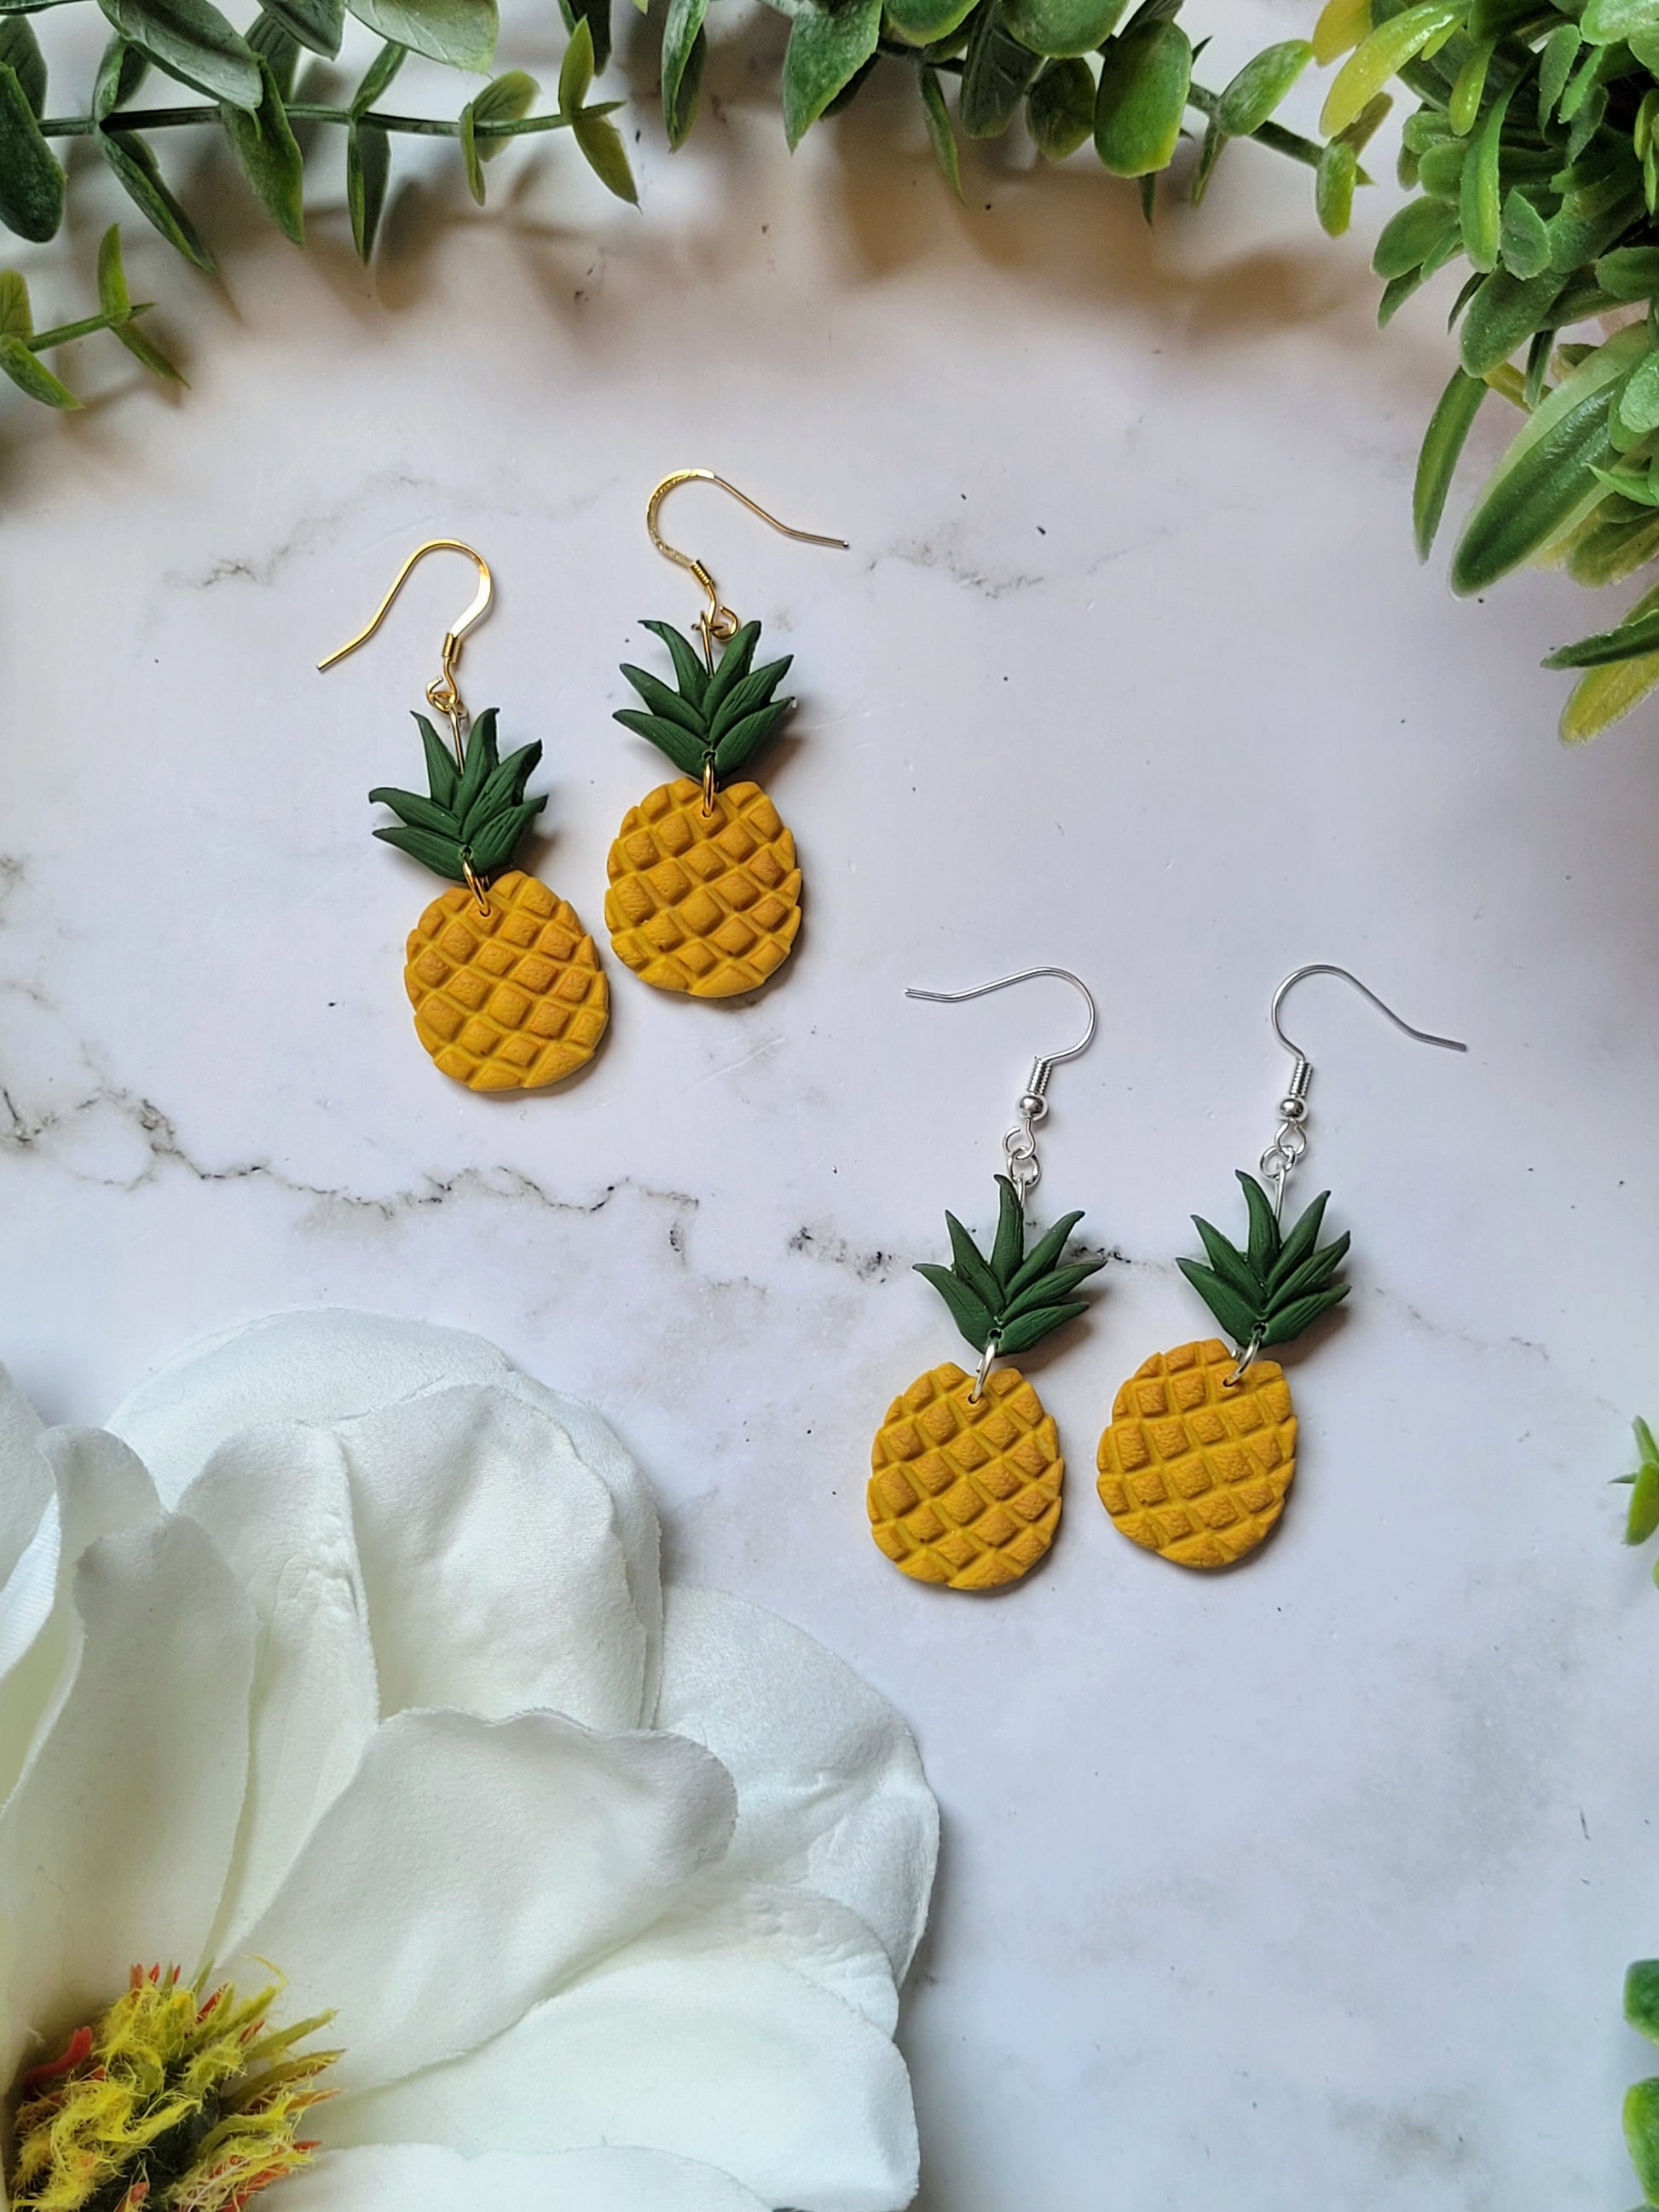 pineapple earrings on a marble background with foliage.